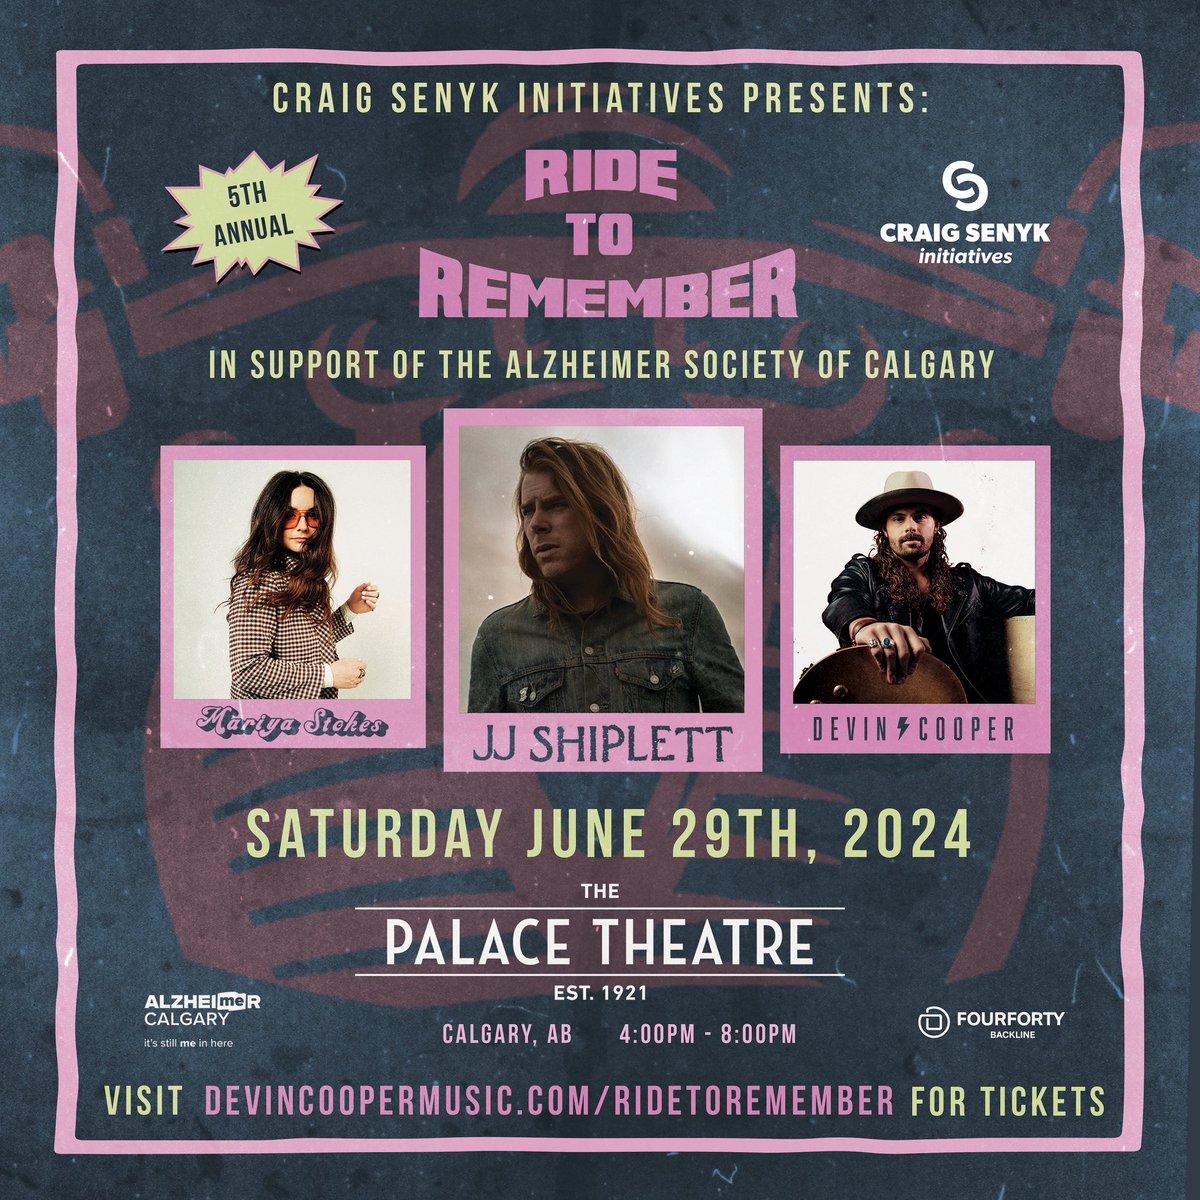 We are beyond stoked to announce the 5th Annual Ride to Remember in Support of the Alzheimer Society of Calgary. June 29th, join us at The Palace Theatre for an afternoon of live music! Our goal is raise $50,000 for the Alzheimer Society of Calgary! devincoopermusic.com/ridetoremember